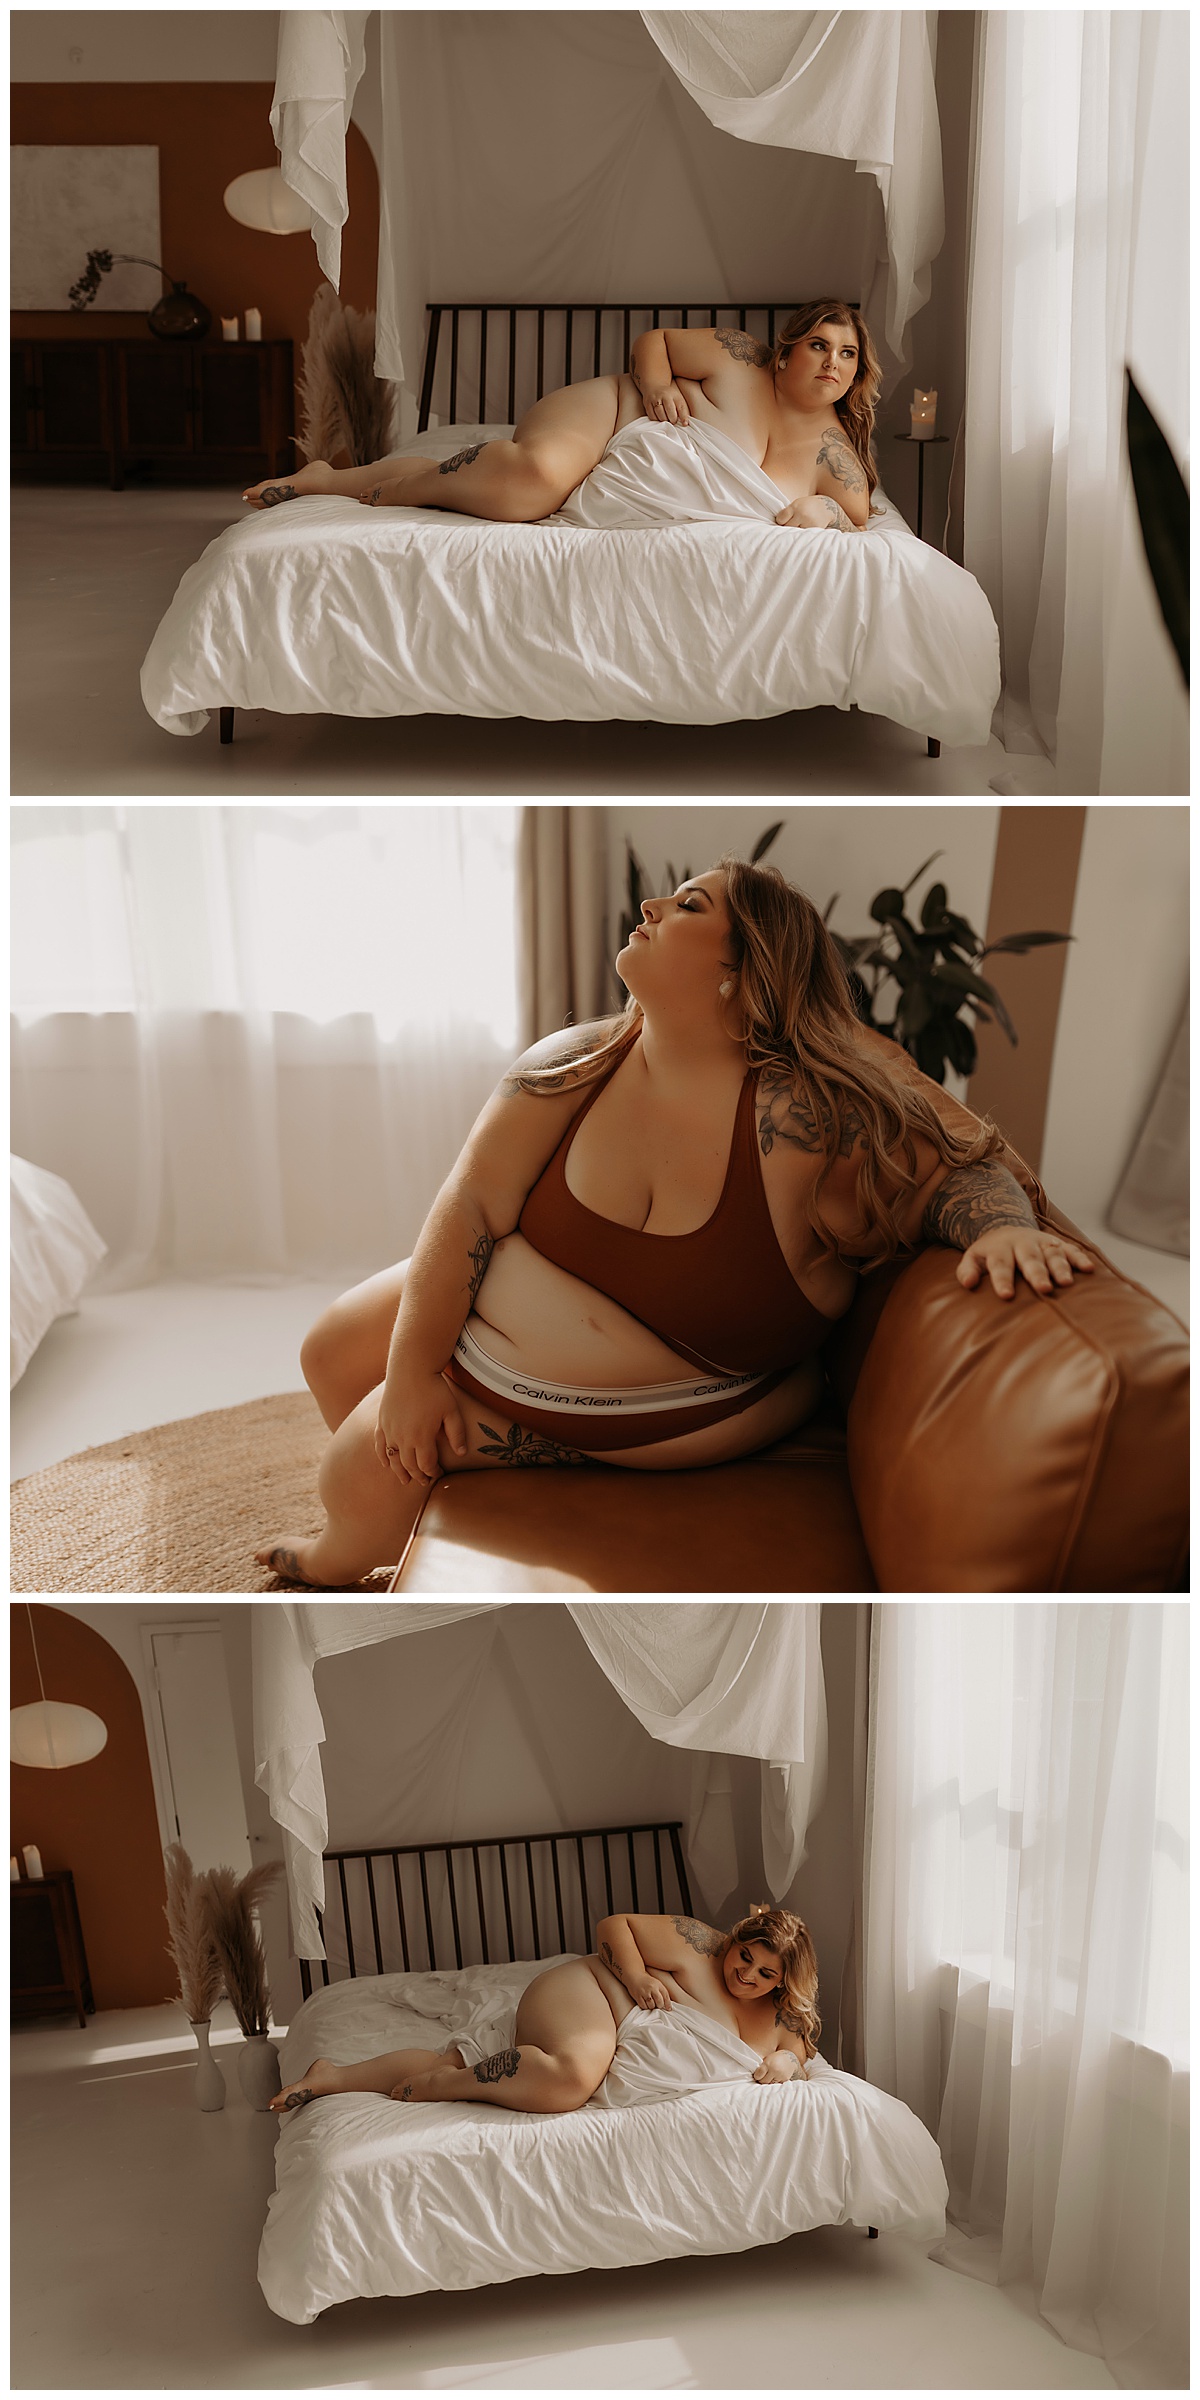 Female lays on the bed and couch wearing lingerie for Mary Castillo Photography